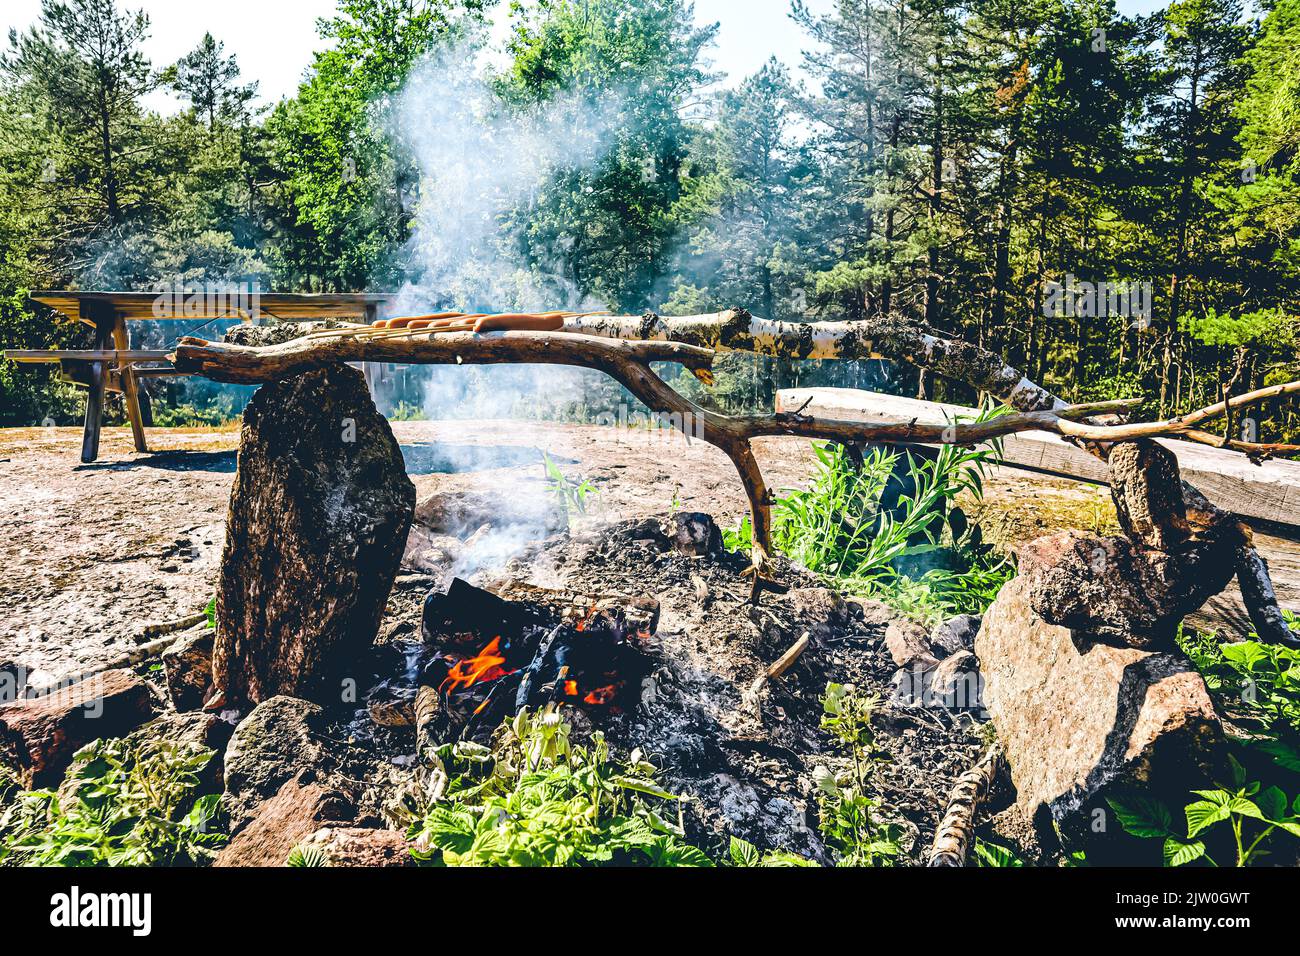 Grilling wieners on a campfire made by rocks and sticks in the Vilsta forest, Eskilstuna, Sweden. Stock Photo